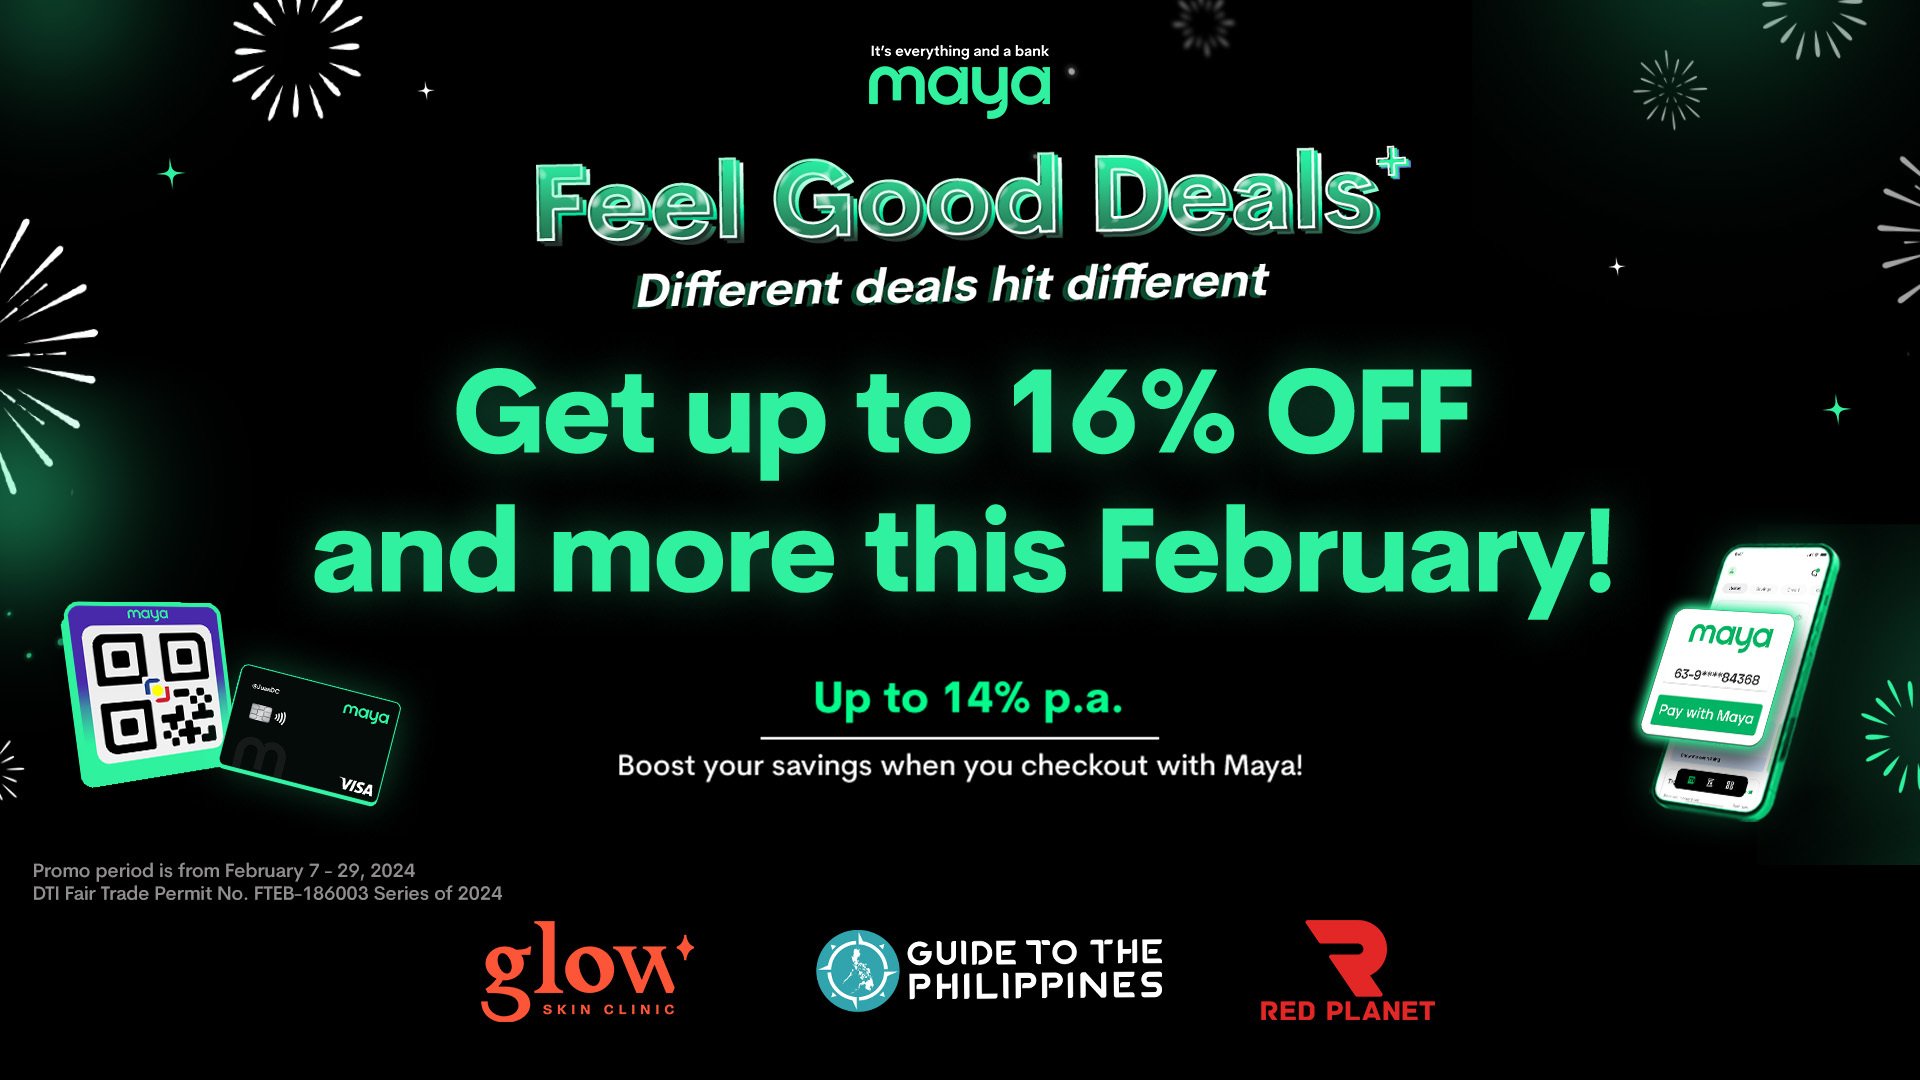 Feel good with deals up to 16% OFF this February!